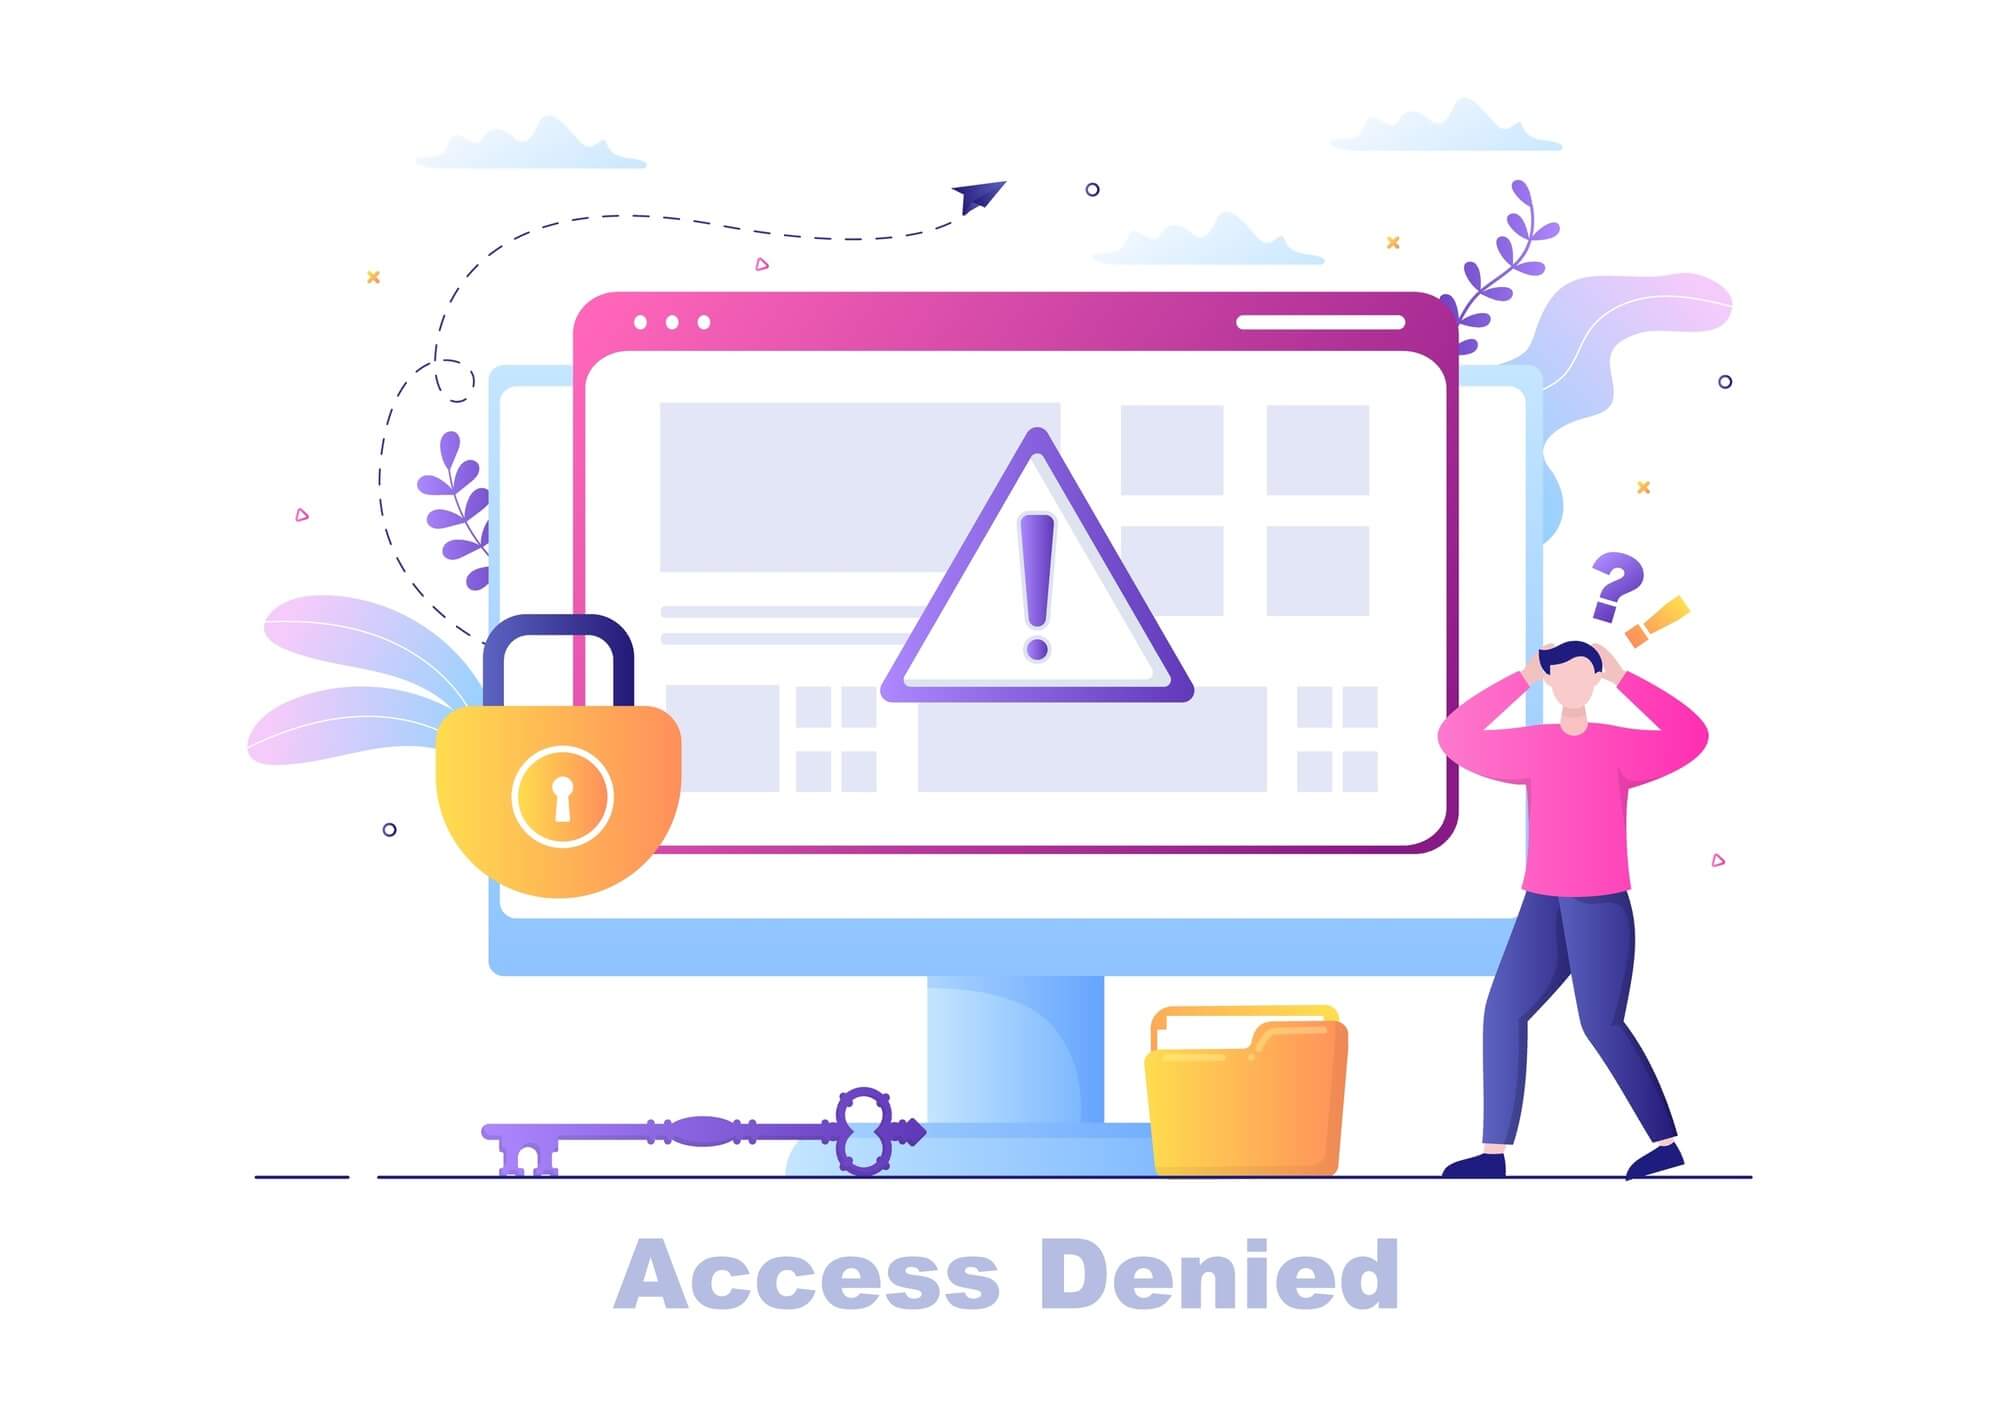 [FIXED] Access Denied: You Don’t Have Permission to Access This Server